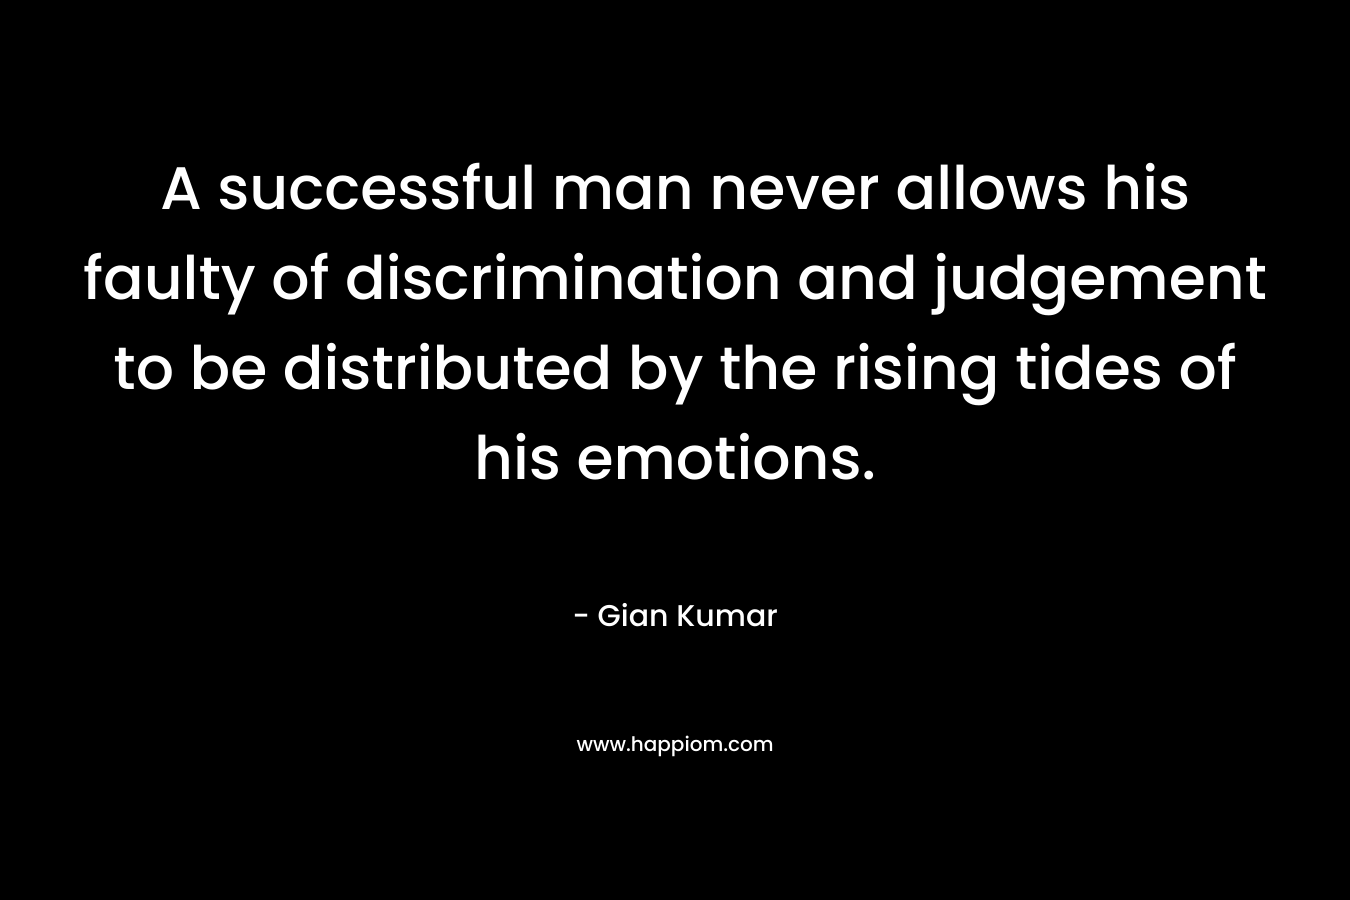 A successful man never allows his faulty of discrimination and judgement to be distributed by the rising tides of his emotions. – Gian Kumar